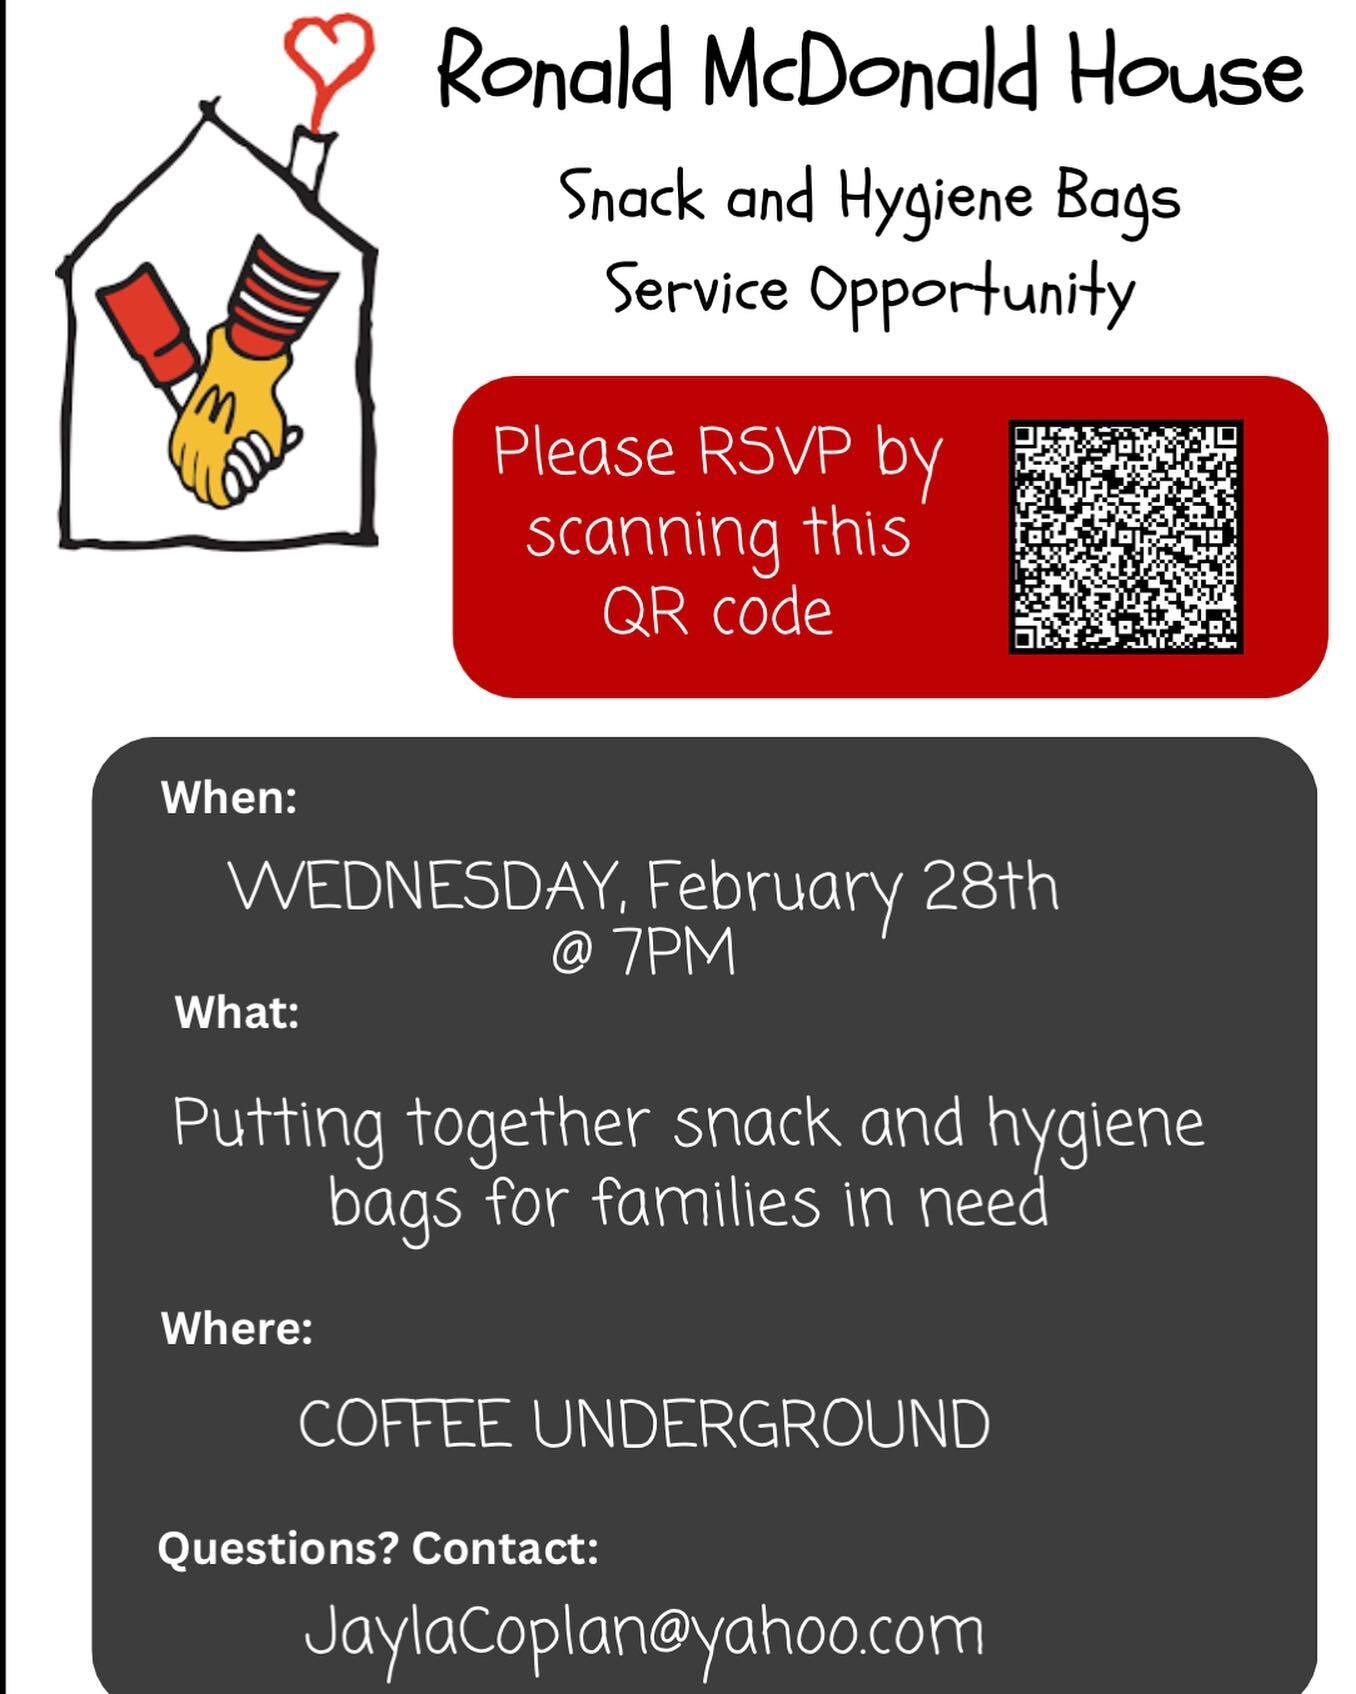 We have another service opportunity a week from today! We will be putting together snack and hygiene bags for families in need. We are also currently accepting donations for any snack sized chips/pretzels/fruit snacks as well as travel sized toiletri